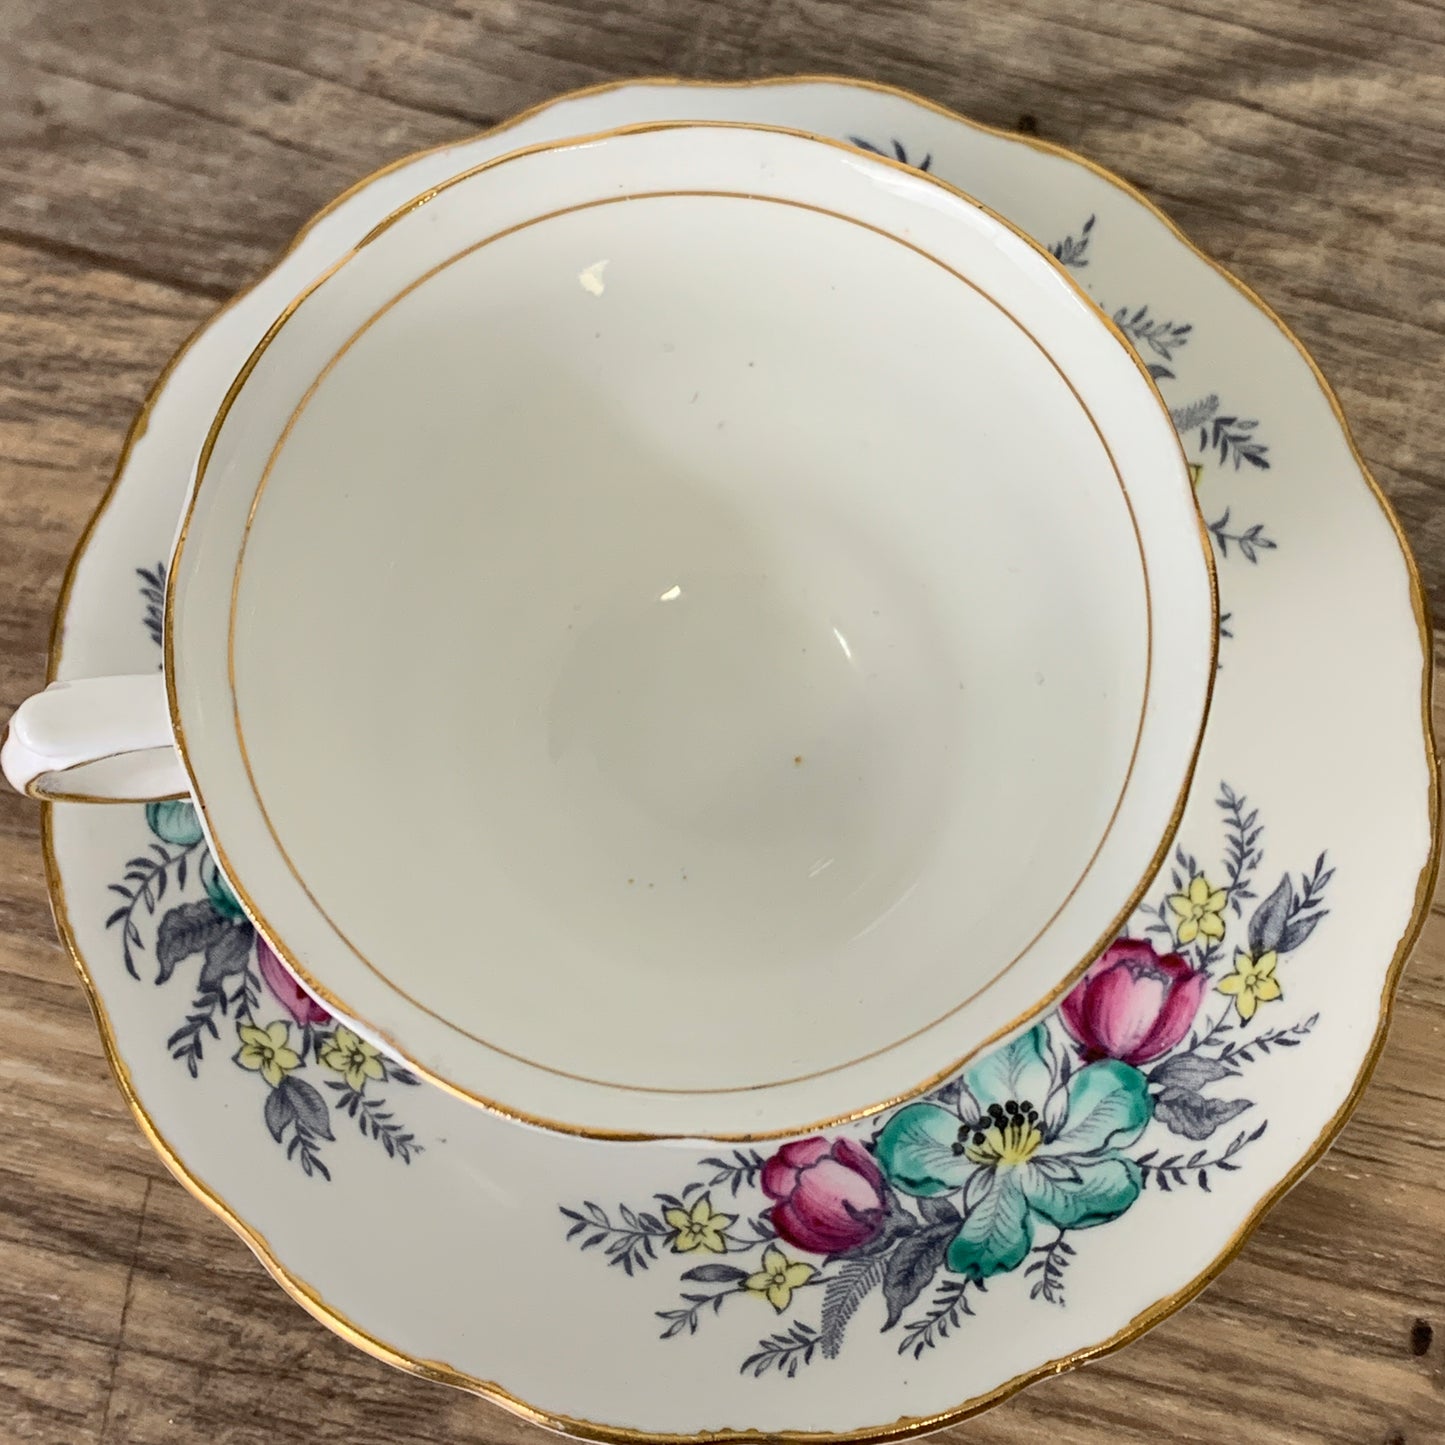 Colclough Hand Painted Teacup with Pink and Teal Flowers